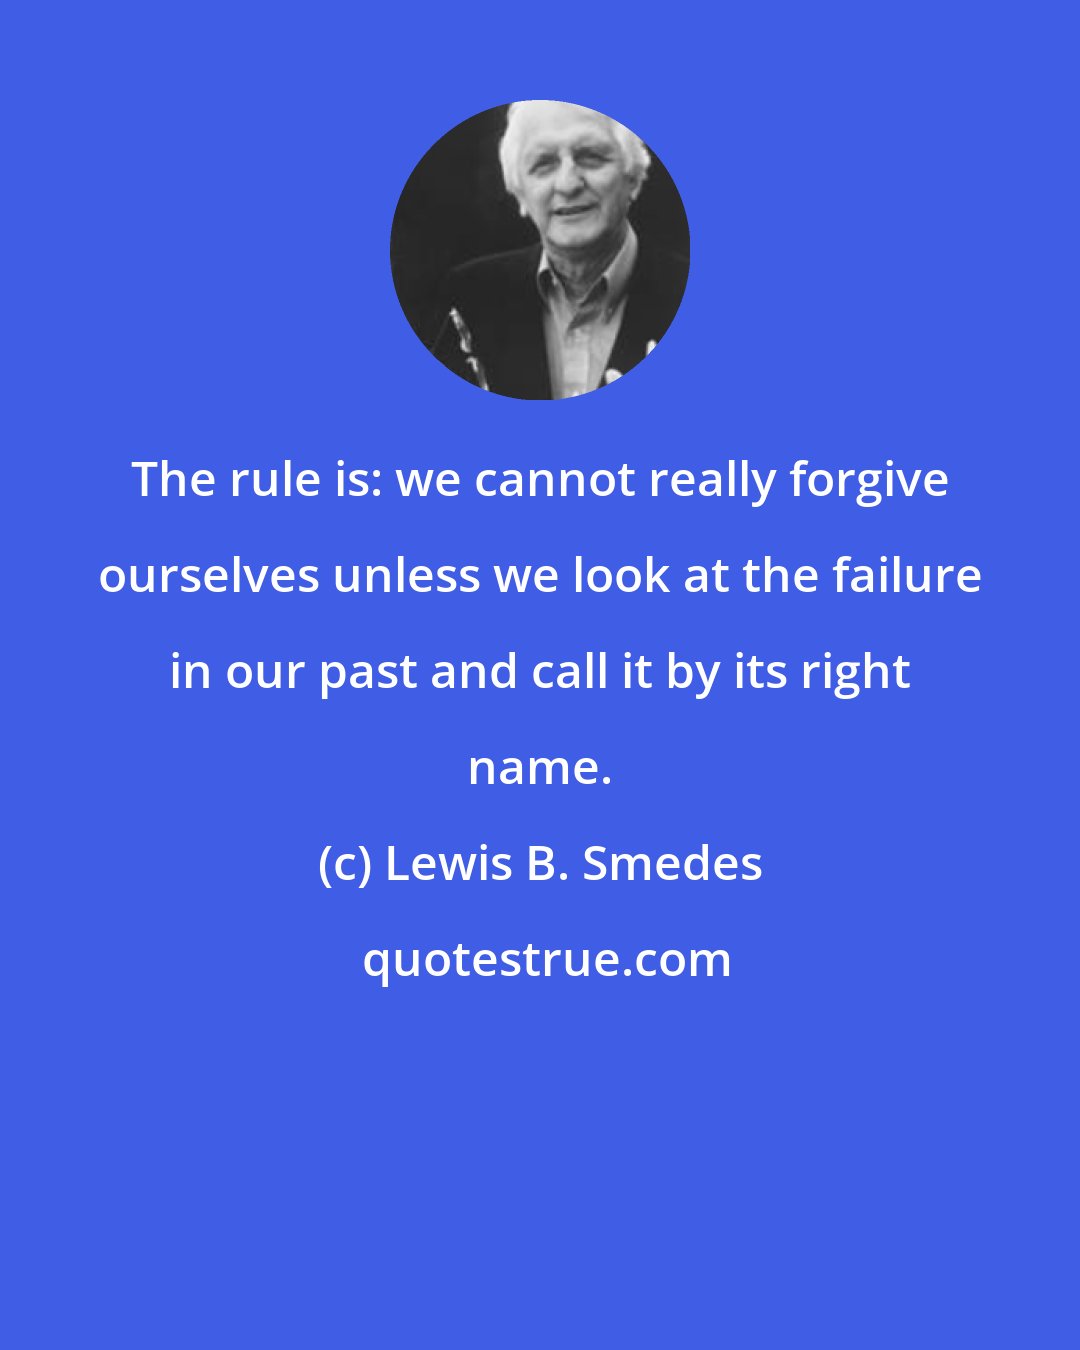 Lewis B. Smedes: The rule is: we cannot really forgive ourselves unless we look at the failure in our past and call it by its right name.